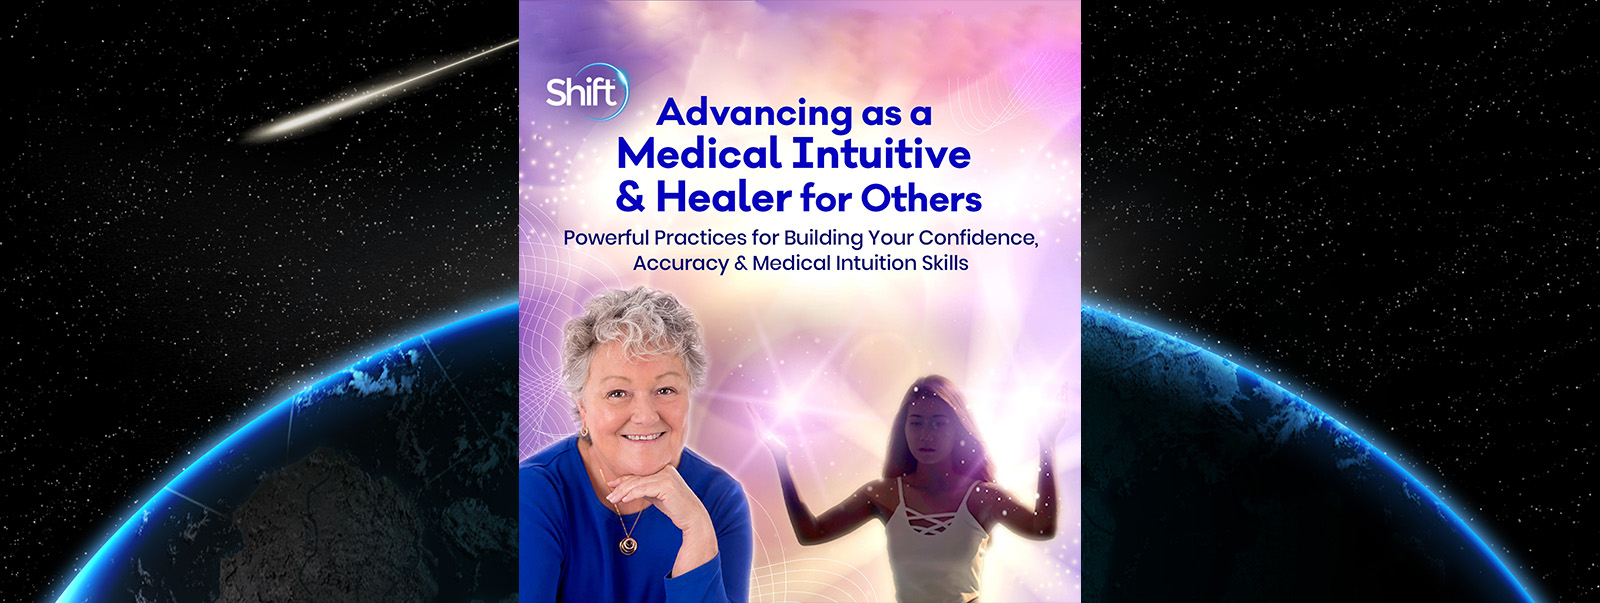 Advancing as a Medical Intuitive & Healer for Others course by Tina Zion available through Shift Network